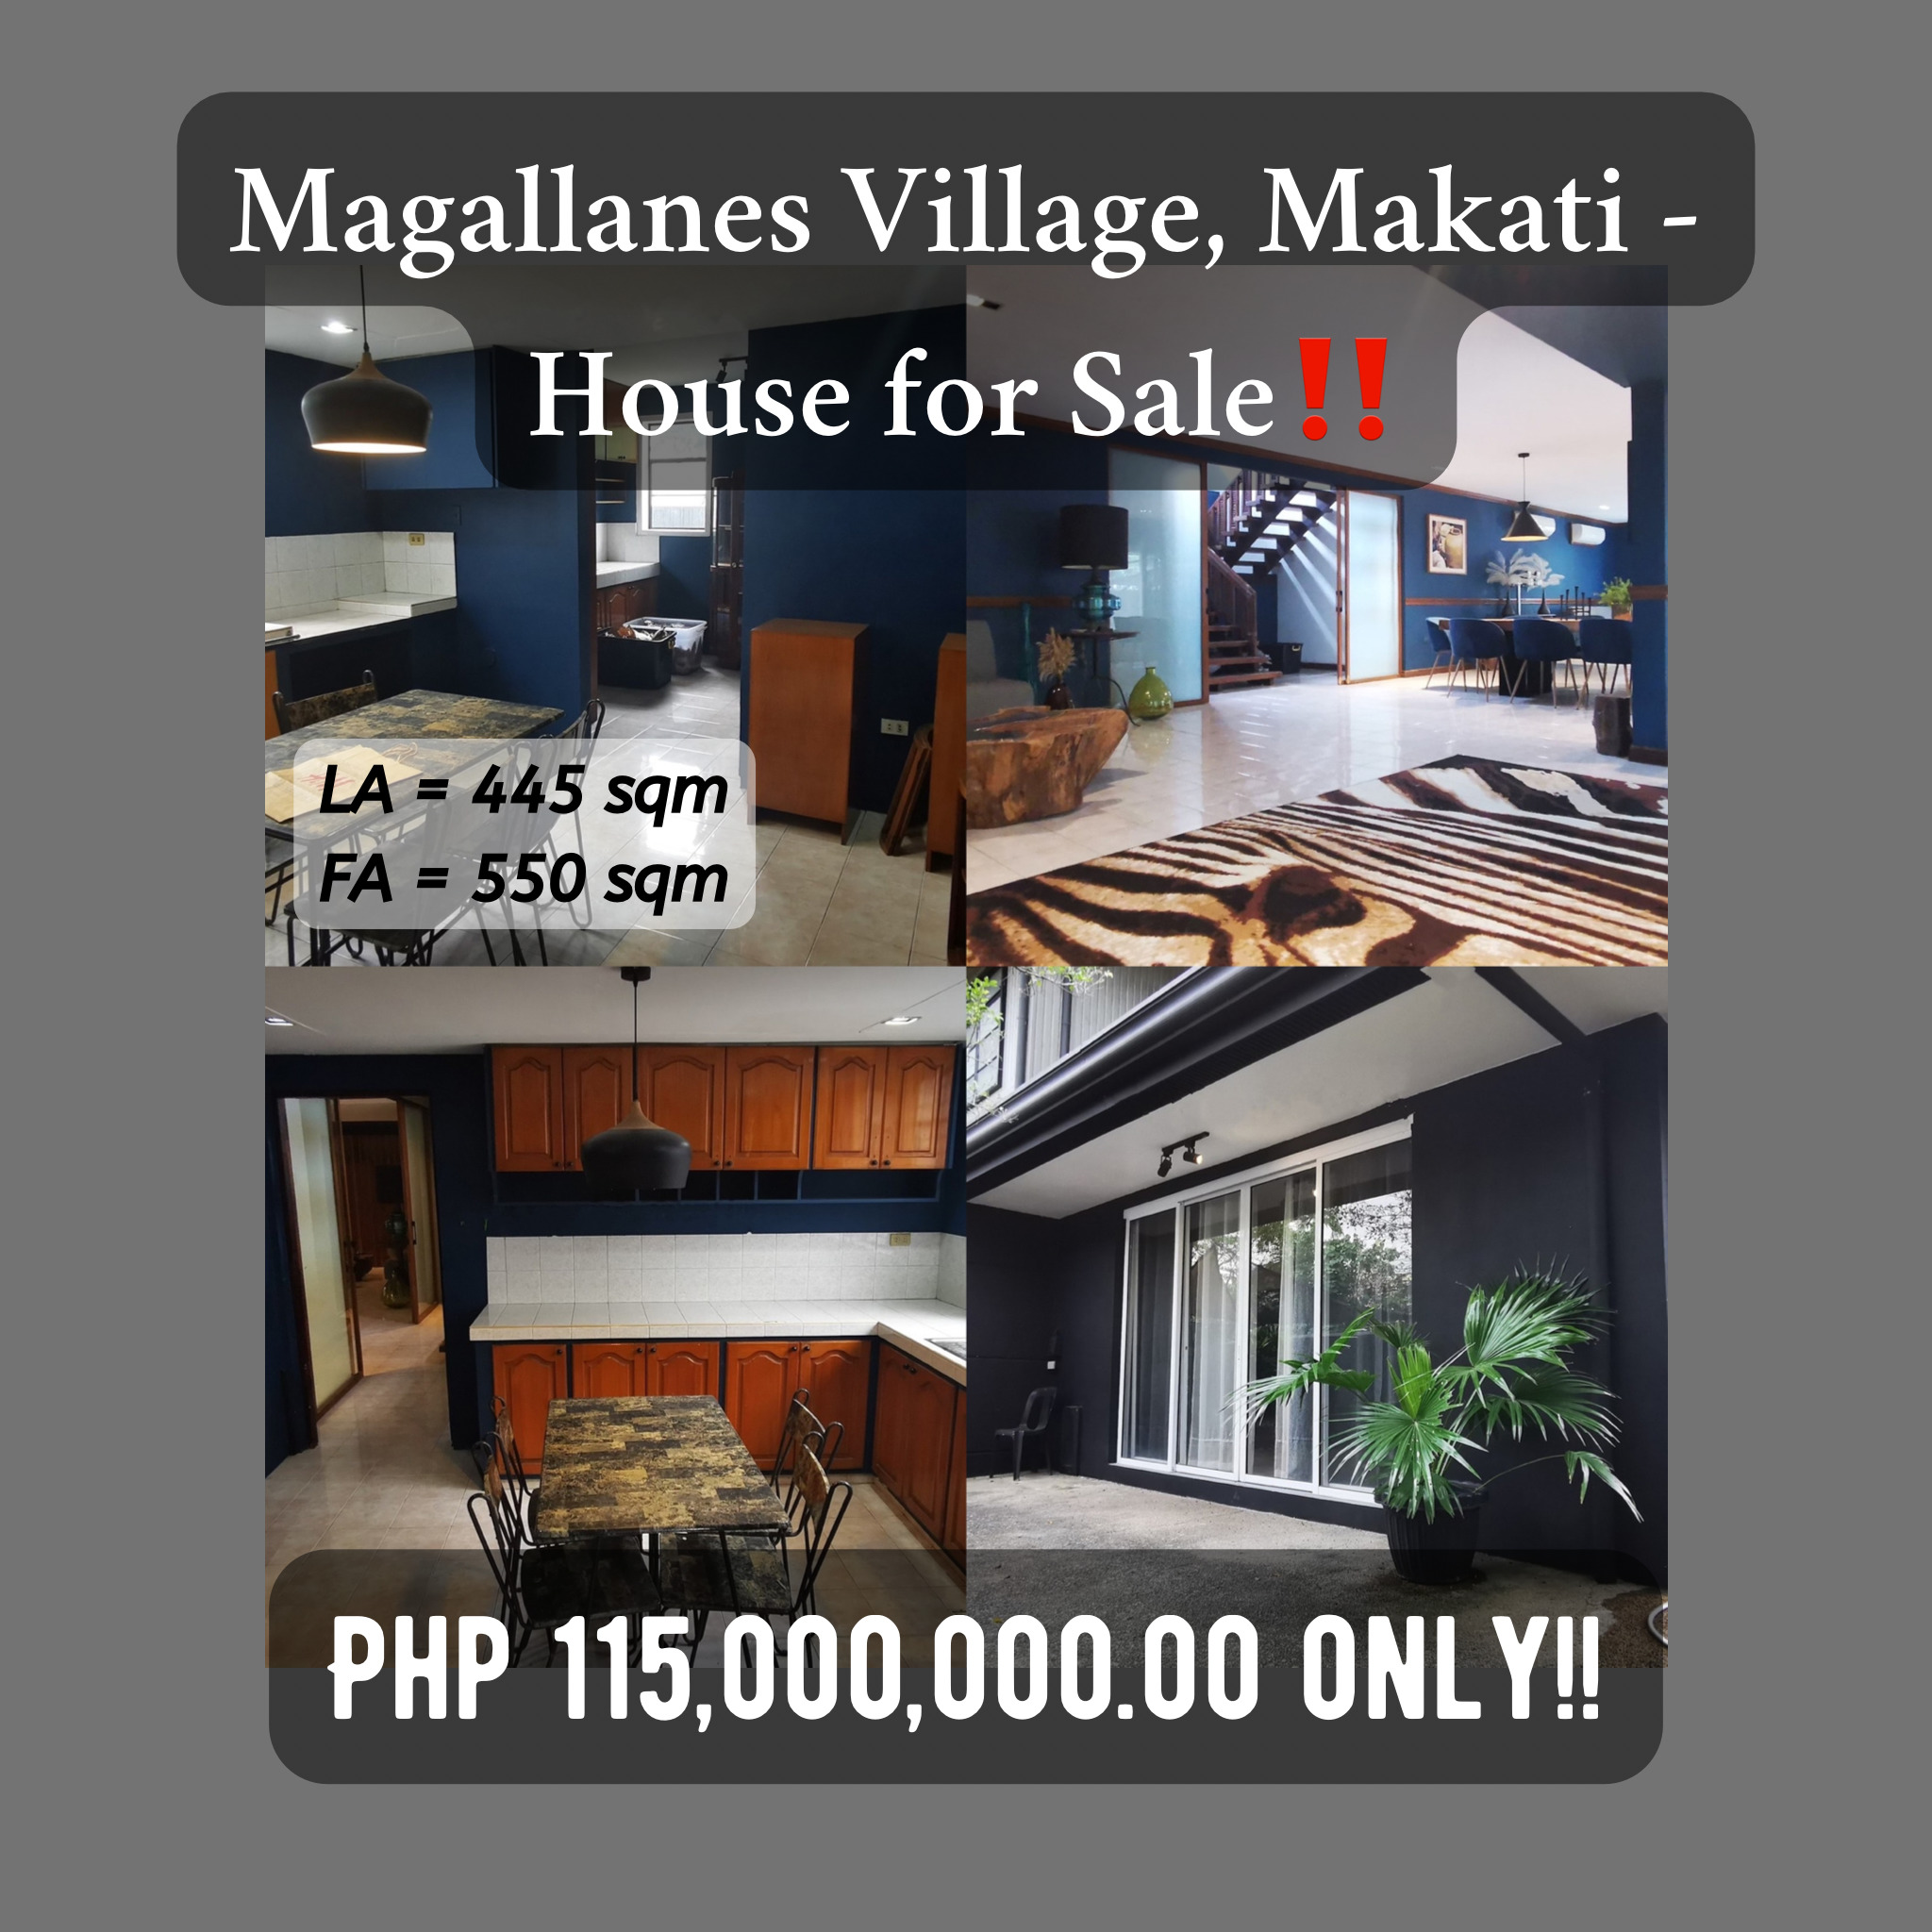 Magallanes Village, Makati – House for Sale‼️